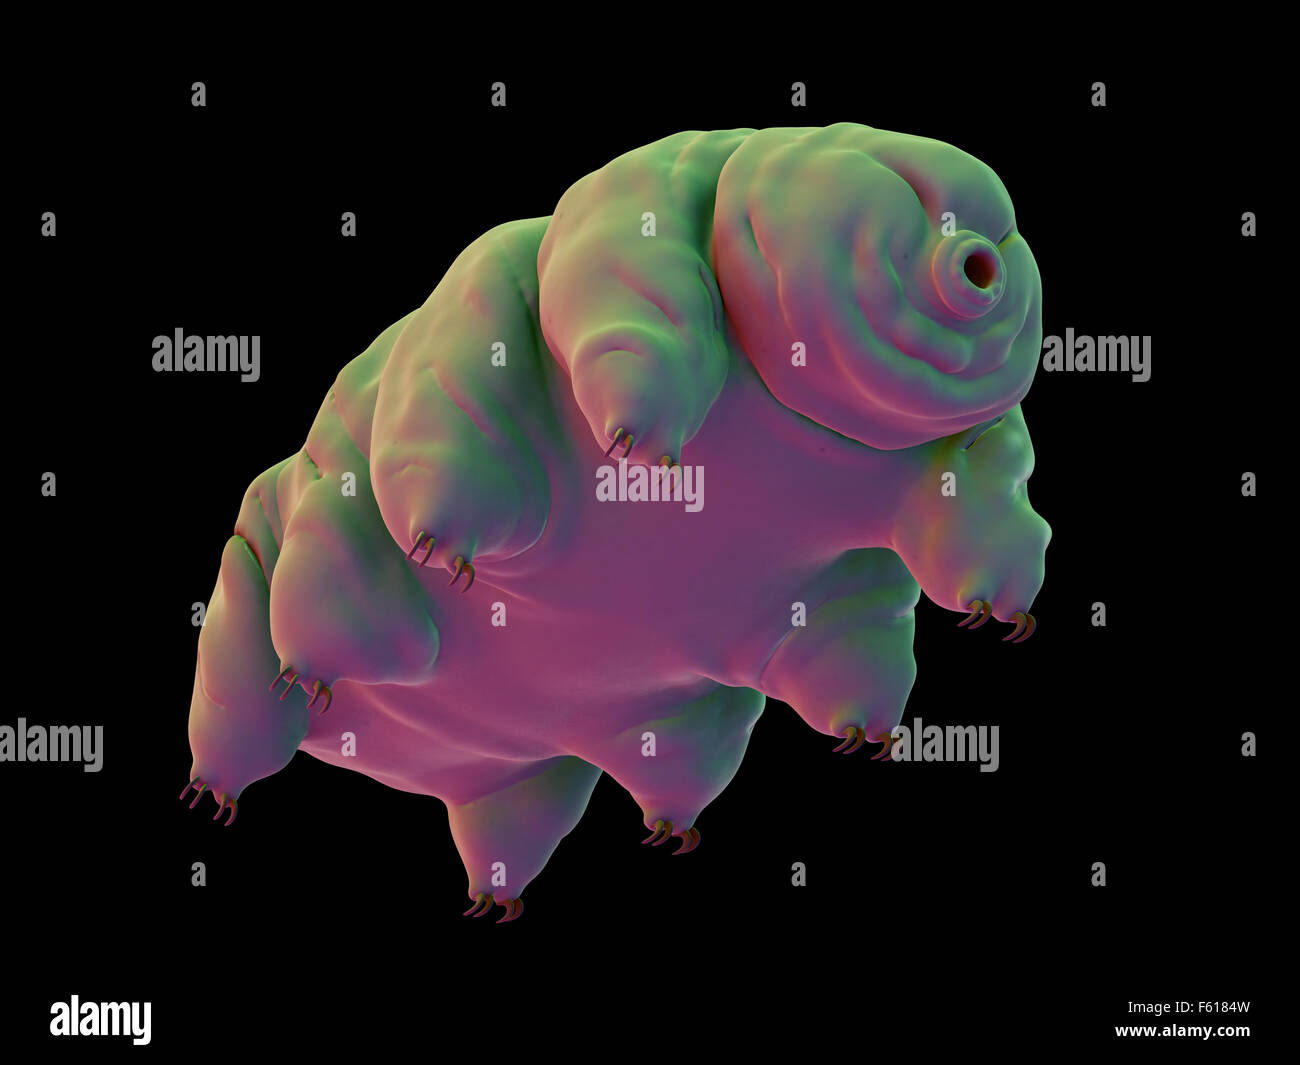 medically accurate illustration of a water bear Stock Photo